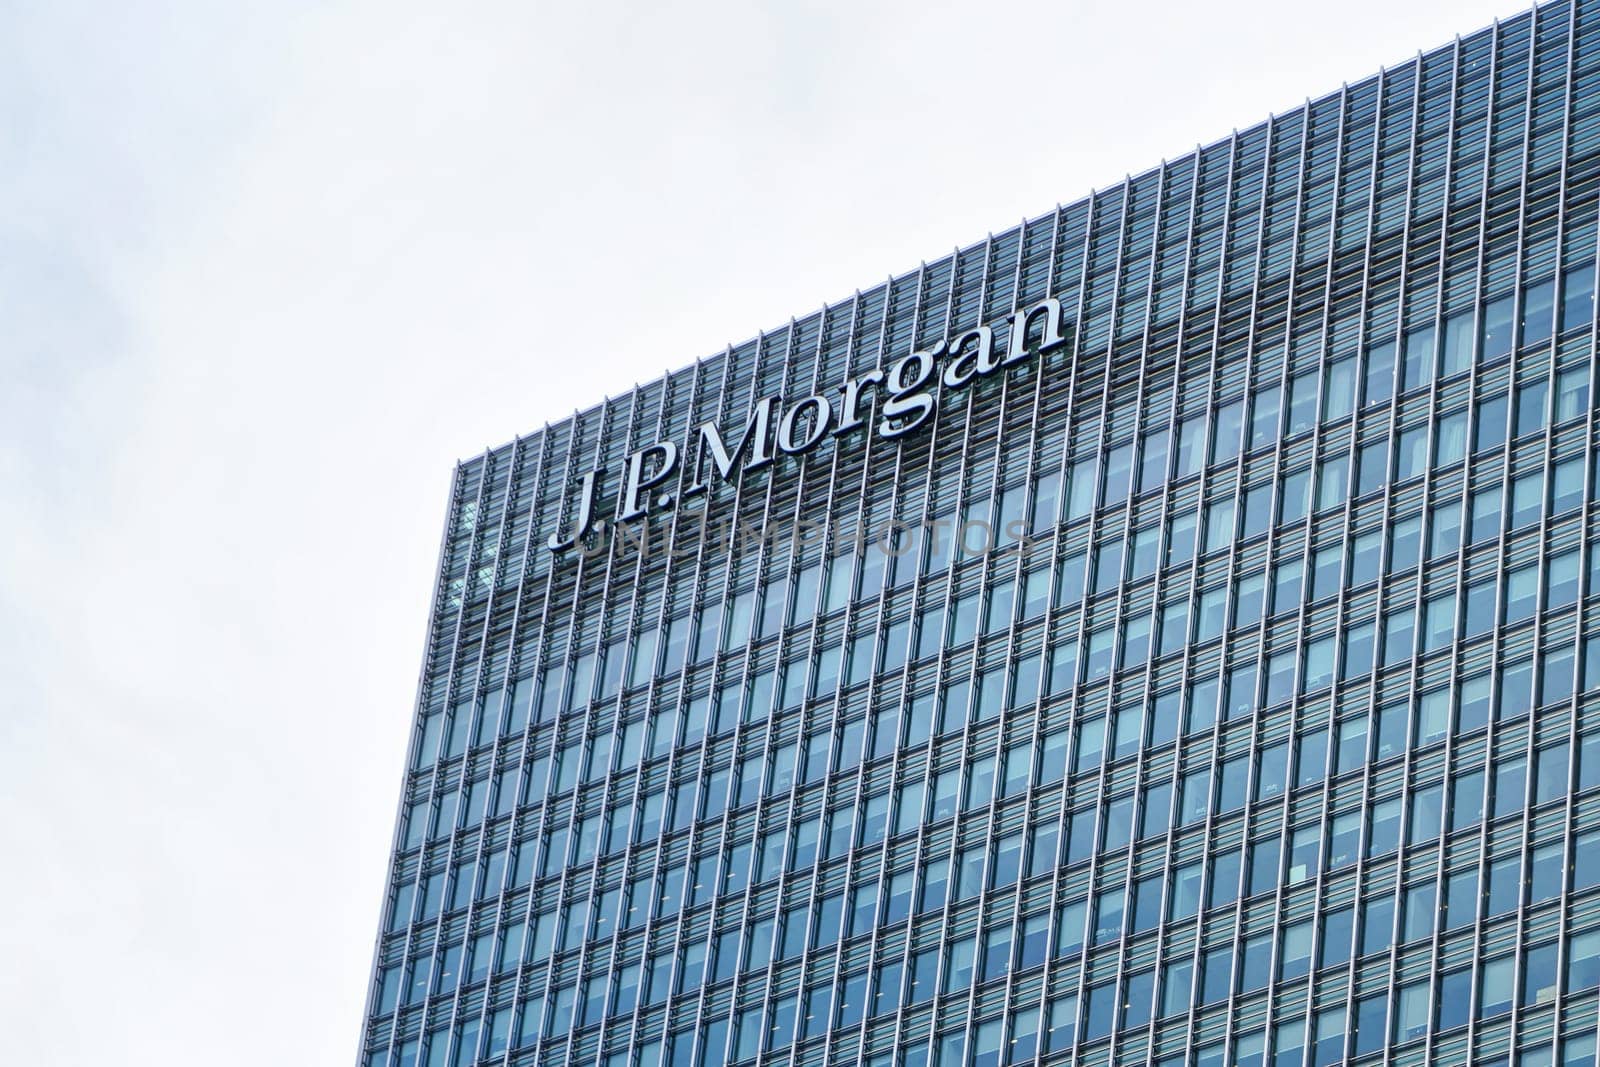 London, United Kingdom - February 03, 2019: Sun shines on J P Morgan signage at top of their UK branch at Canary Wharf. JPMorgan Chase is US multinational investment bank founded (originally) 1799